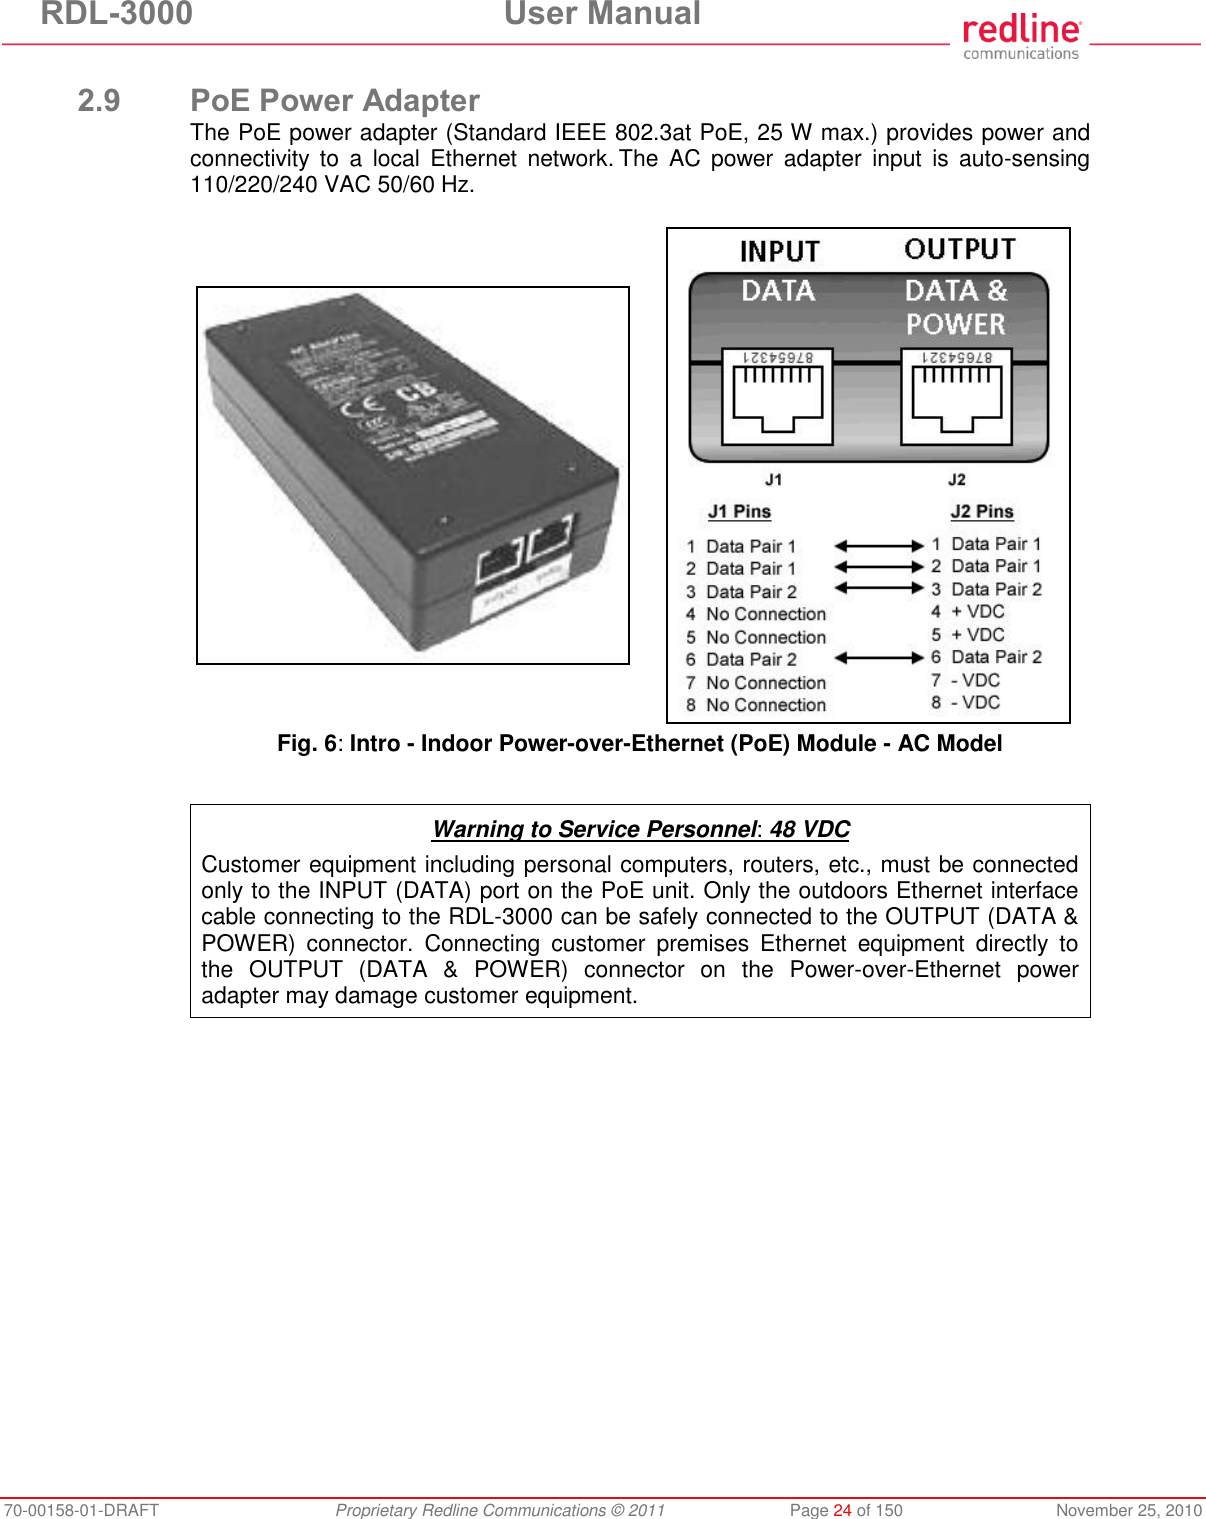 RDL-3000  User Manual 70-00158-01-DRAFT  Proprietary Redline Communications © 2011  Page 24 of 150  November 25, 2010  2.9 PoE Power Adapter The PoE power adapter (Standard IEEE 802.3at PoE, 25 W max.) provides power and connectivity  to  a  local  Ethernet  network. The  AC  power  adapter  input  is  auto-sensing 110/220/240 VAC 50/60 Hz.     Fig. 6: Intro - Indoor Power-over-Ethernet (PoE) Module - AC Model   Warning to Service Personnel: 48 VDC Customer equipment including personal computers, routers, etc., must be connected only to the INPUT (DATA) port on the PoE unit. Only the outdoors Ethernet interface cable connecting to the RDL-3000 can be safely connected to the OUTPUT (DATA &amp; POWER)  connector.  Connecting  customer  premises  Ethernet  equipment  directly  to the  OUTPUT  (DATA  &amp;  POWER)  connector  on  the  Power-over-Ethernet  power adapter may damage customer equipment.  